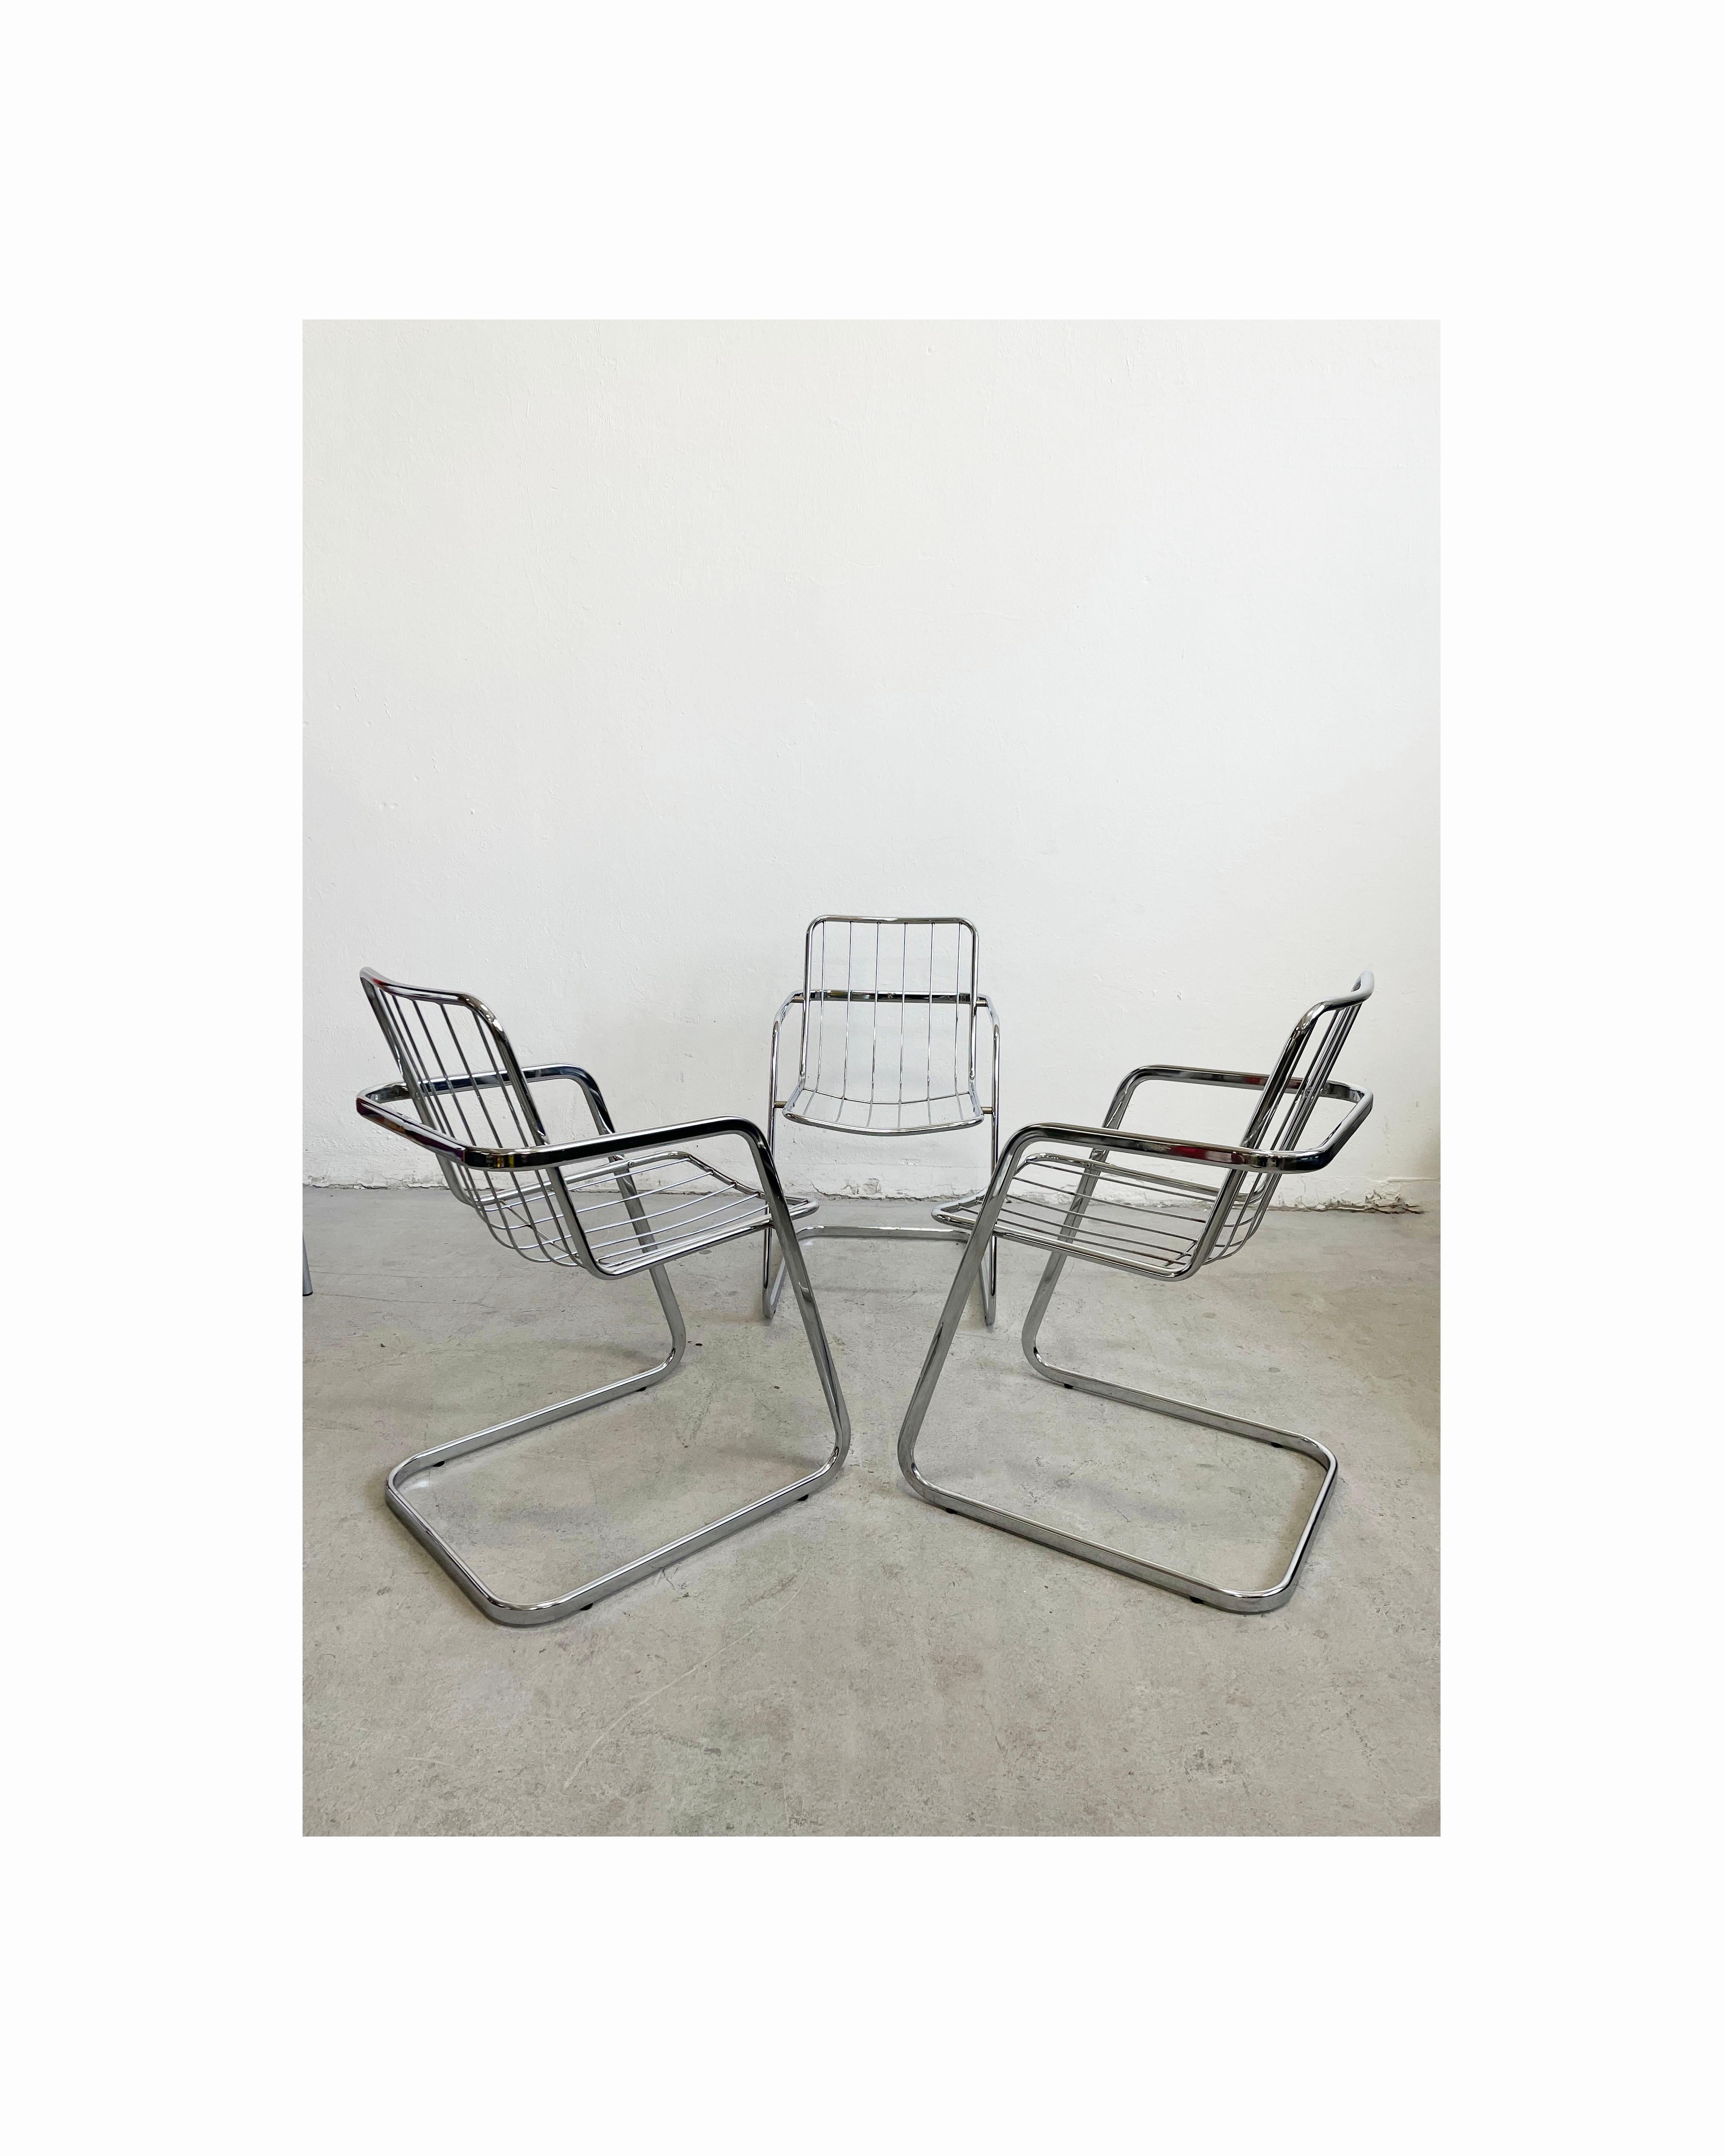 Set of 3 Italian chrome dining chairs attributed to Gastone Rinaldi, produced in the 1970s 

The chairs are made of chrome

The structure is sound and sturdy, metal parts show minor traces of cosmetic wear

